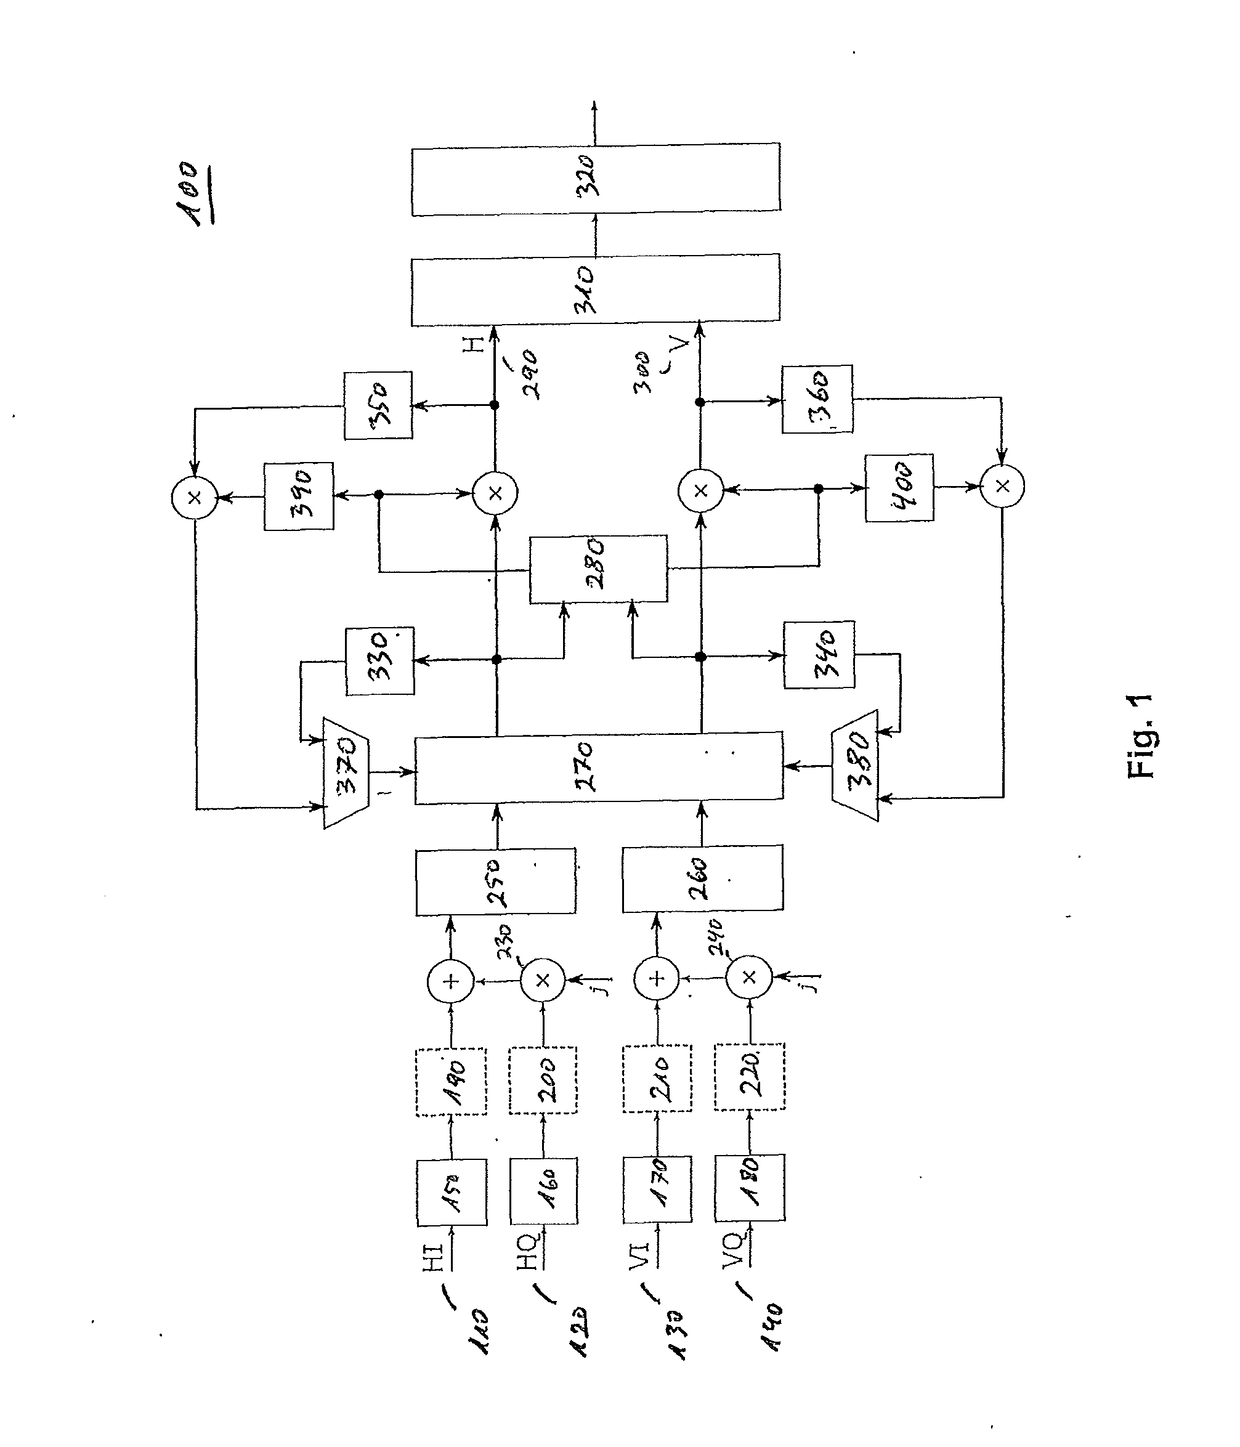 Signal processing in an optical receiver